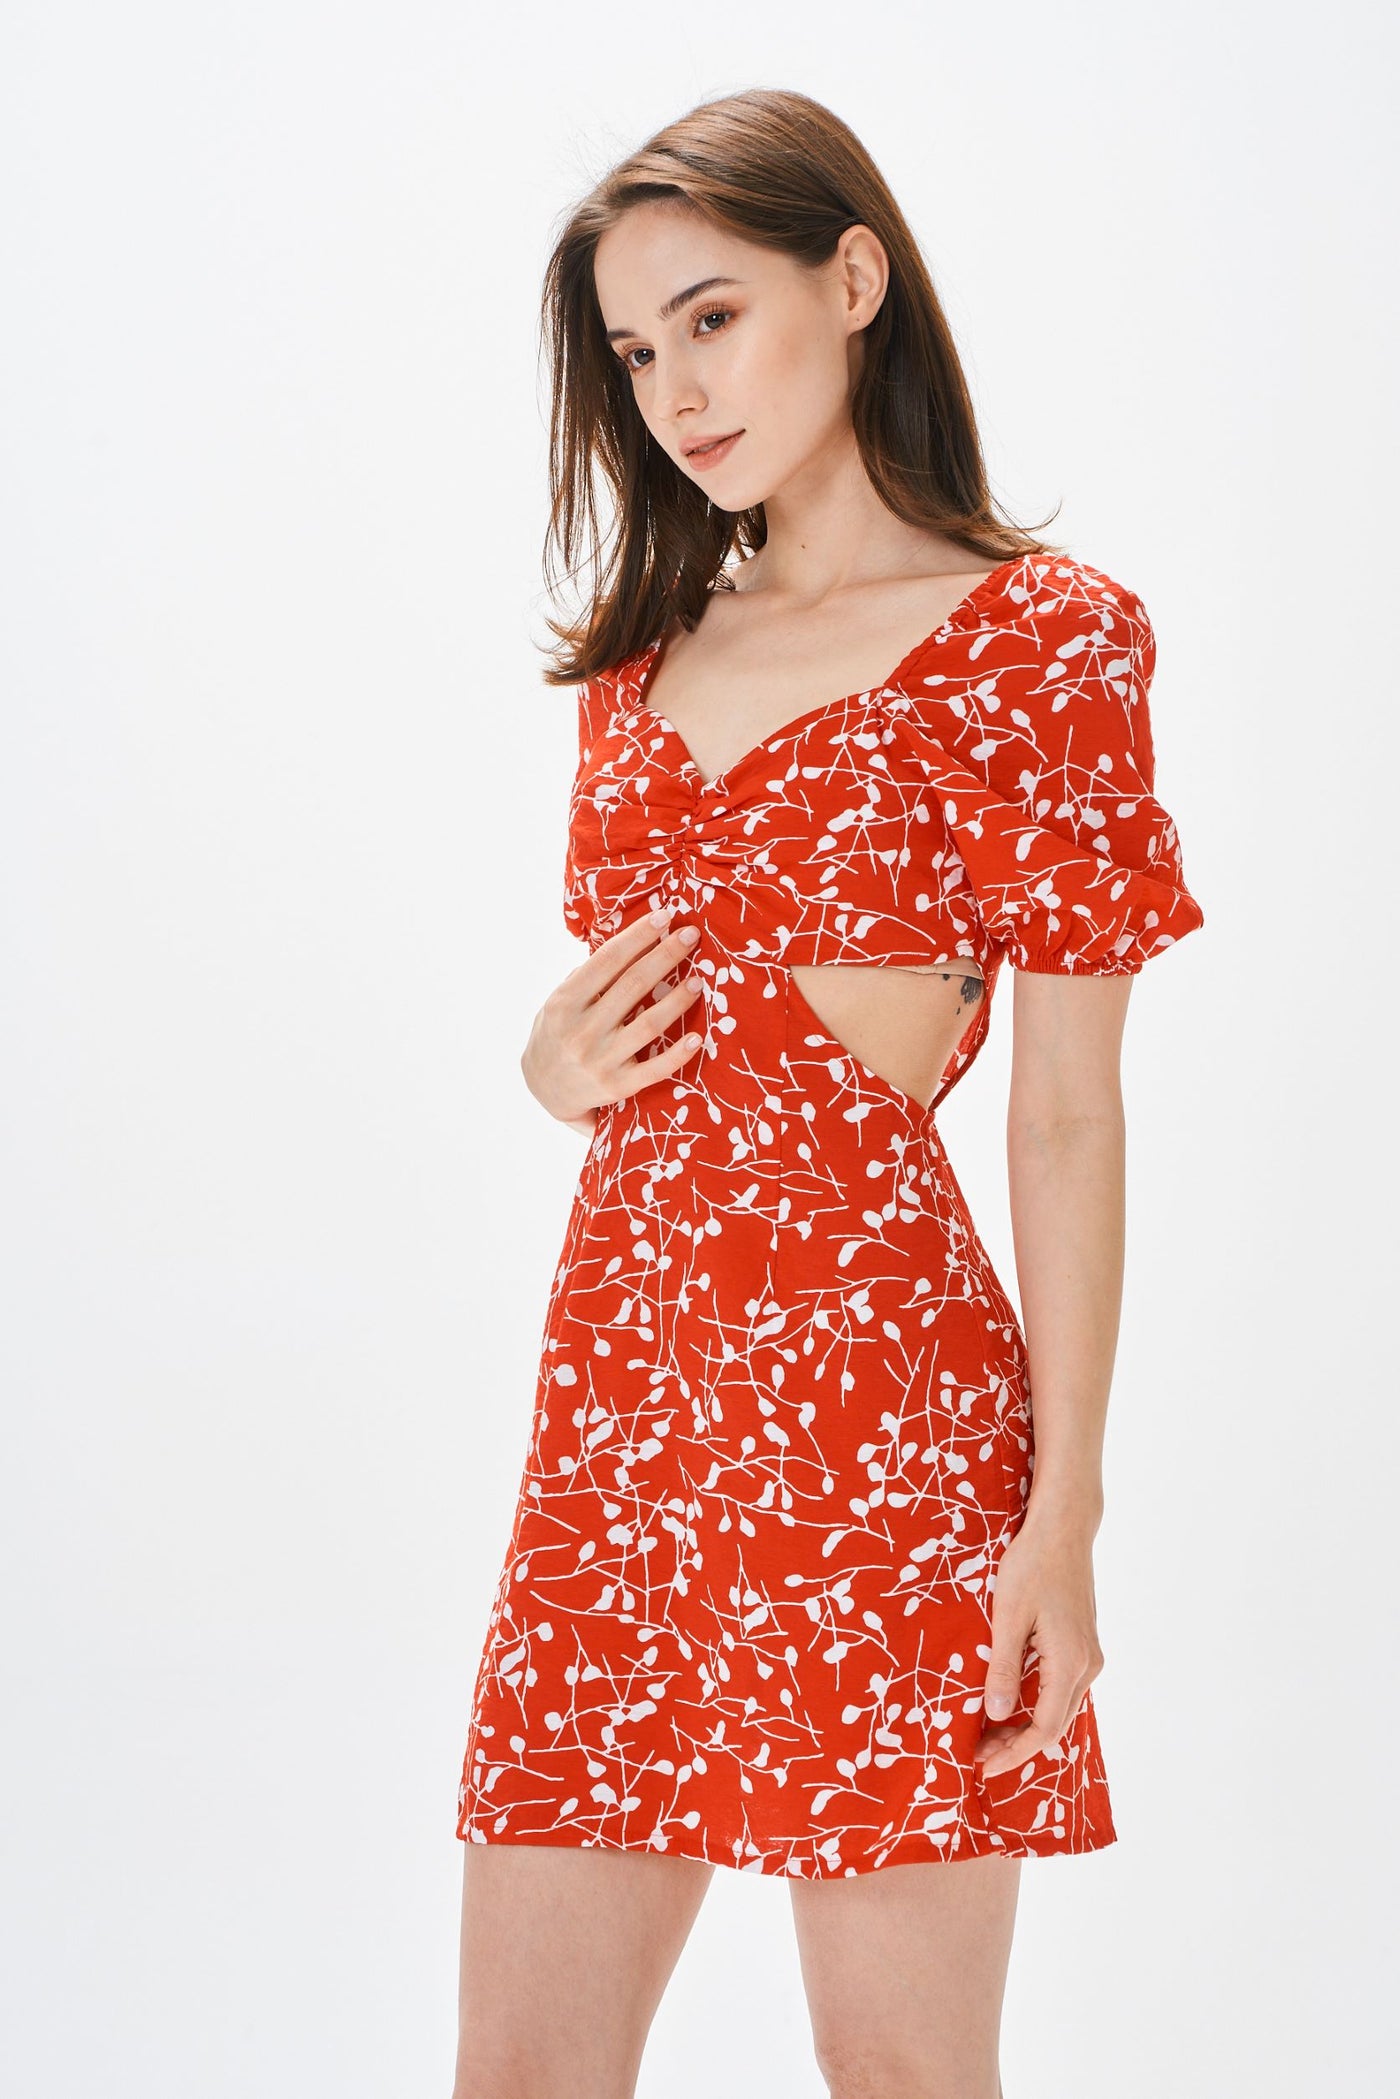 CUT-OUT SWEETHEART RED DRESS